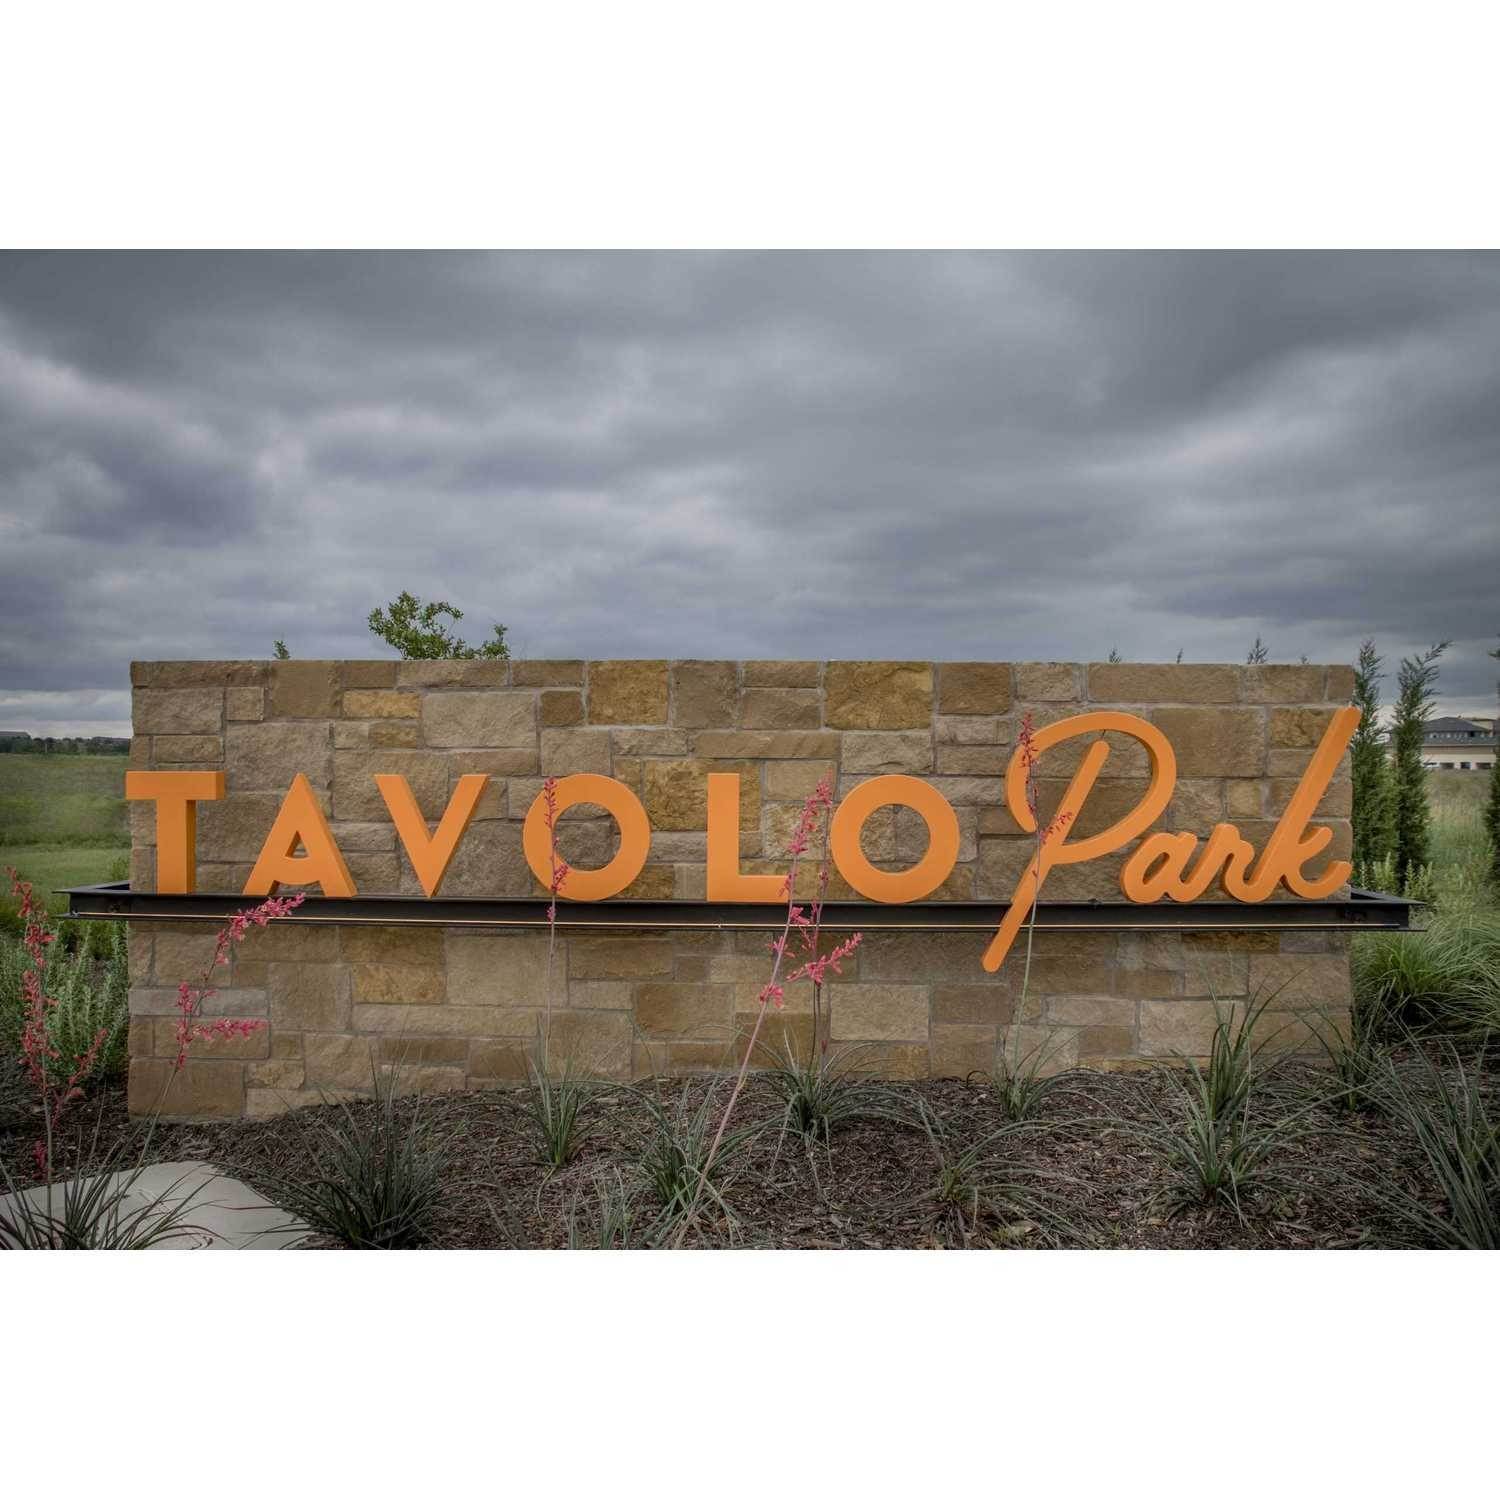 2. Tavolo Park 60ft. lots building at 6221 Whitebrush Place, Fort Worth, TX 76132